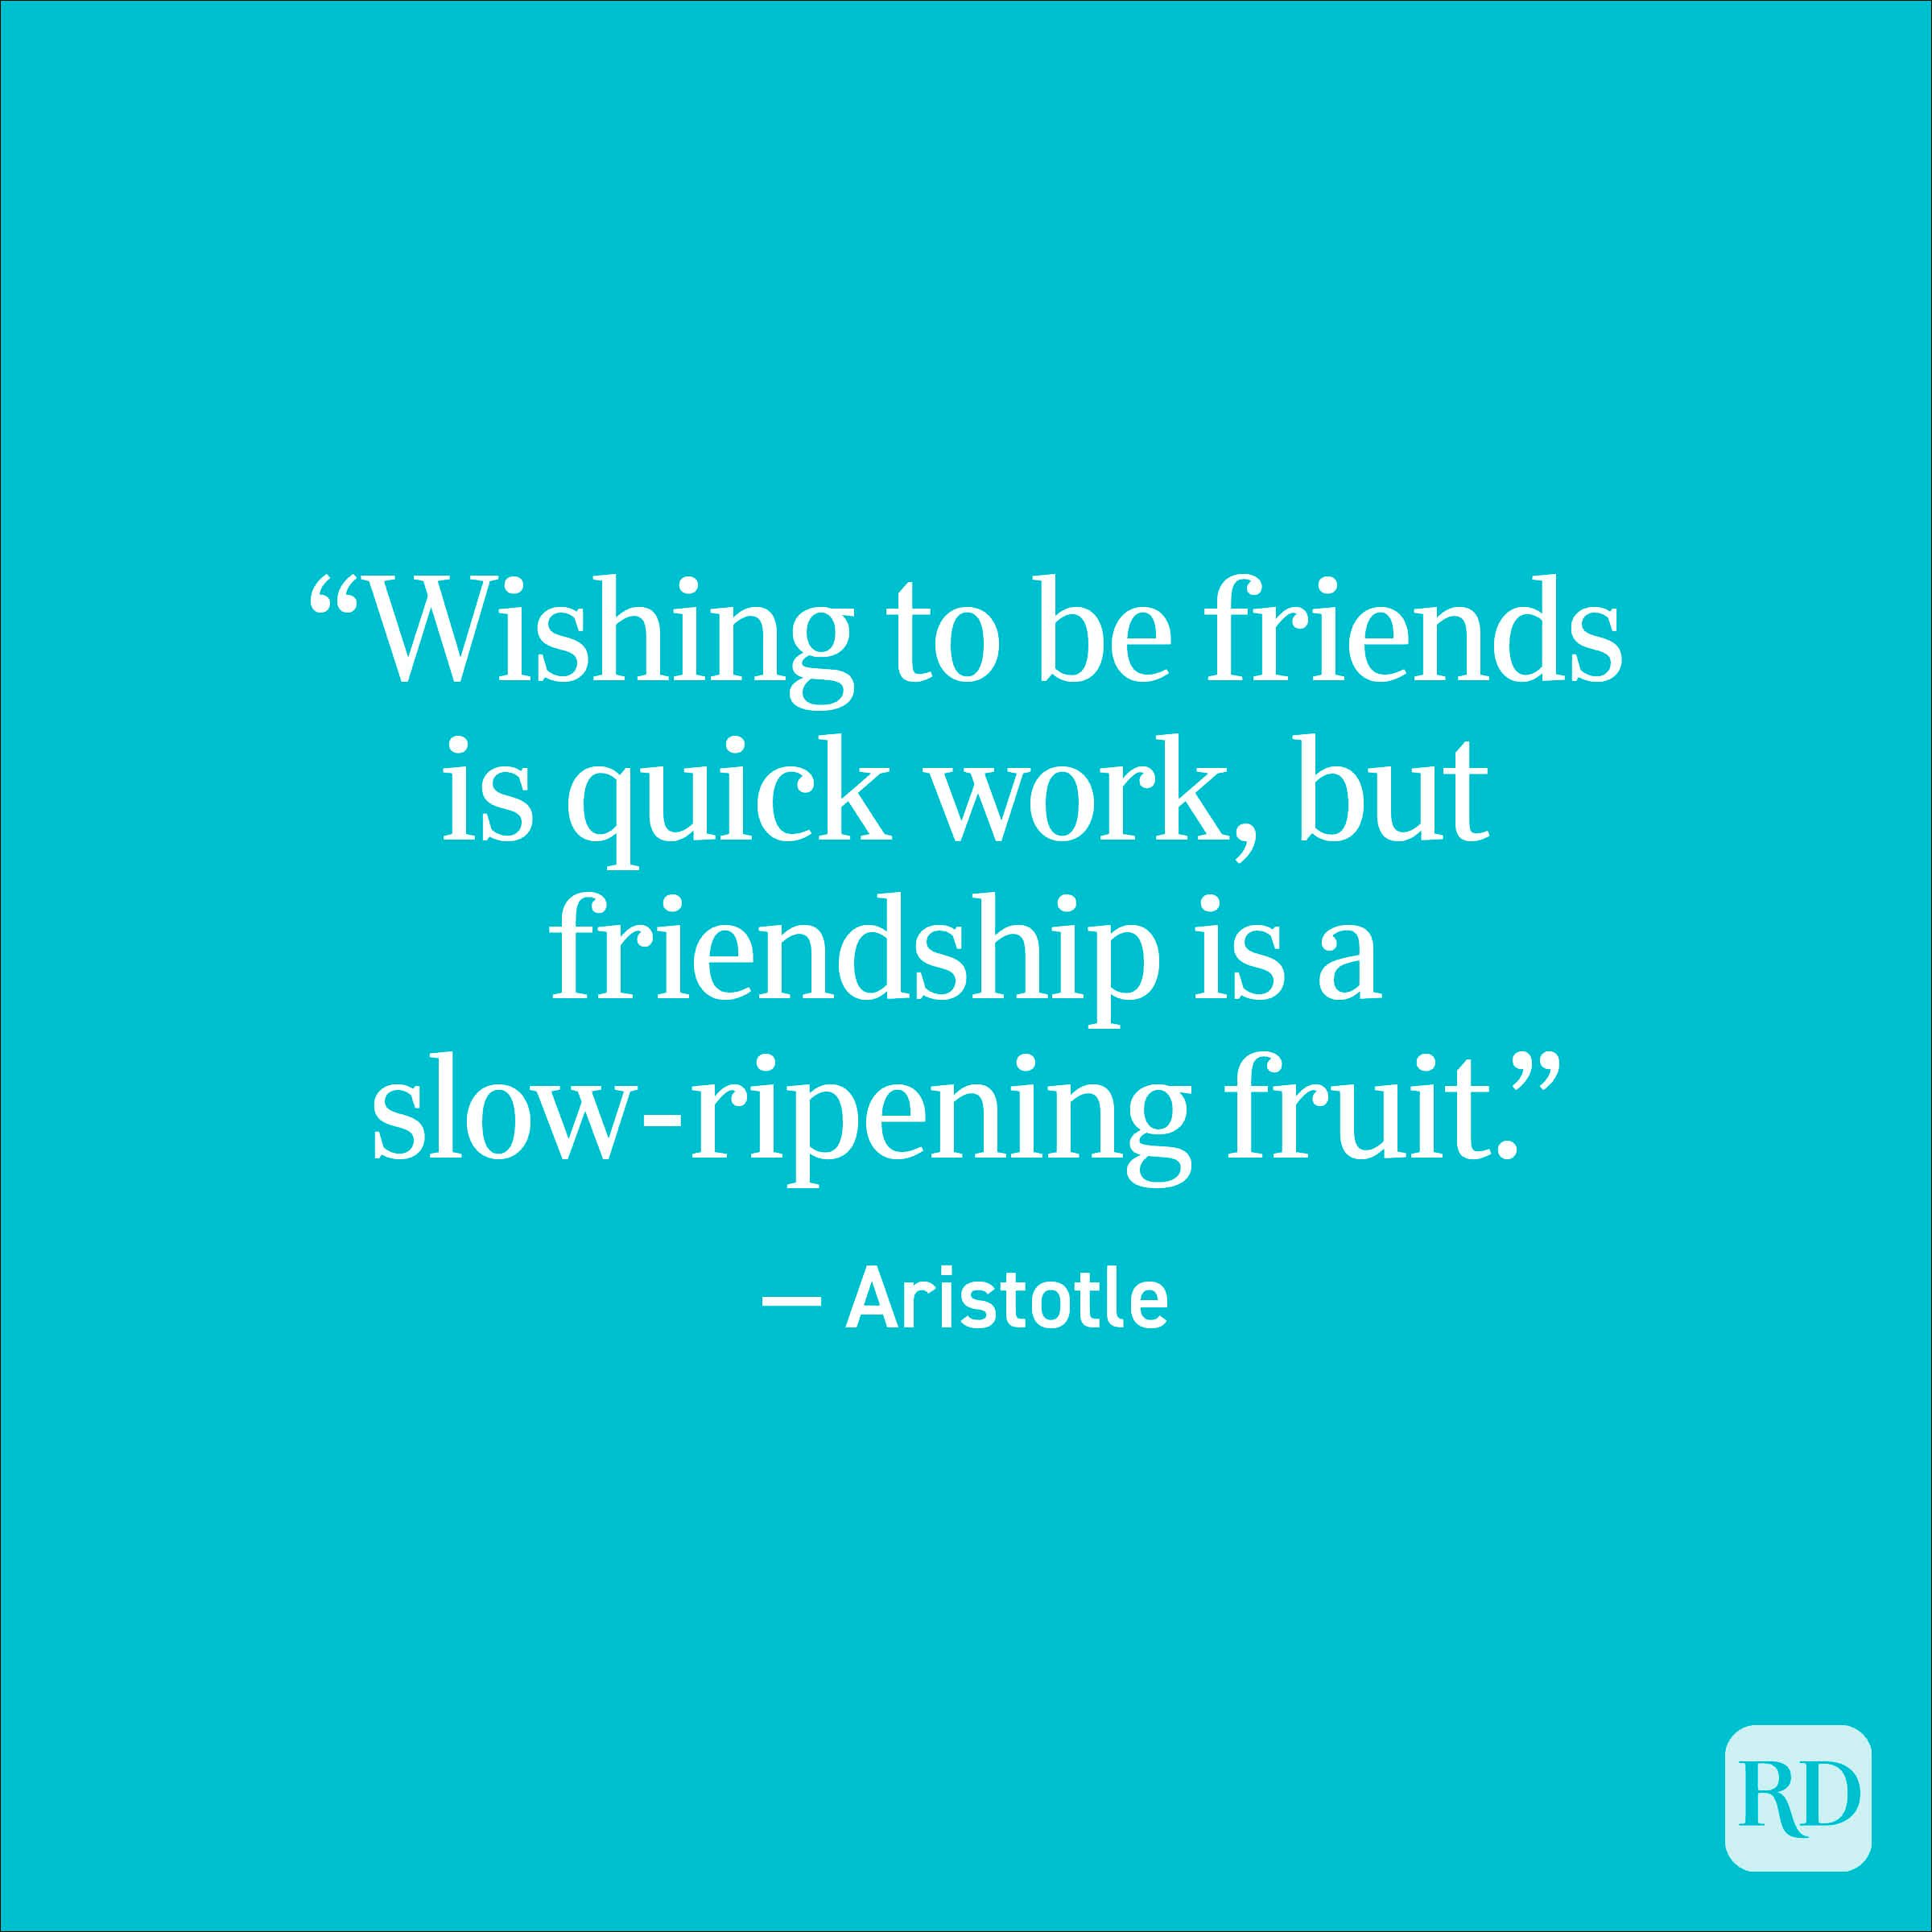 "Wishing to be friends is quick work, but friendship is a slow-ripening fruit." - Aristotle